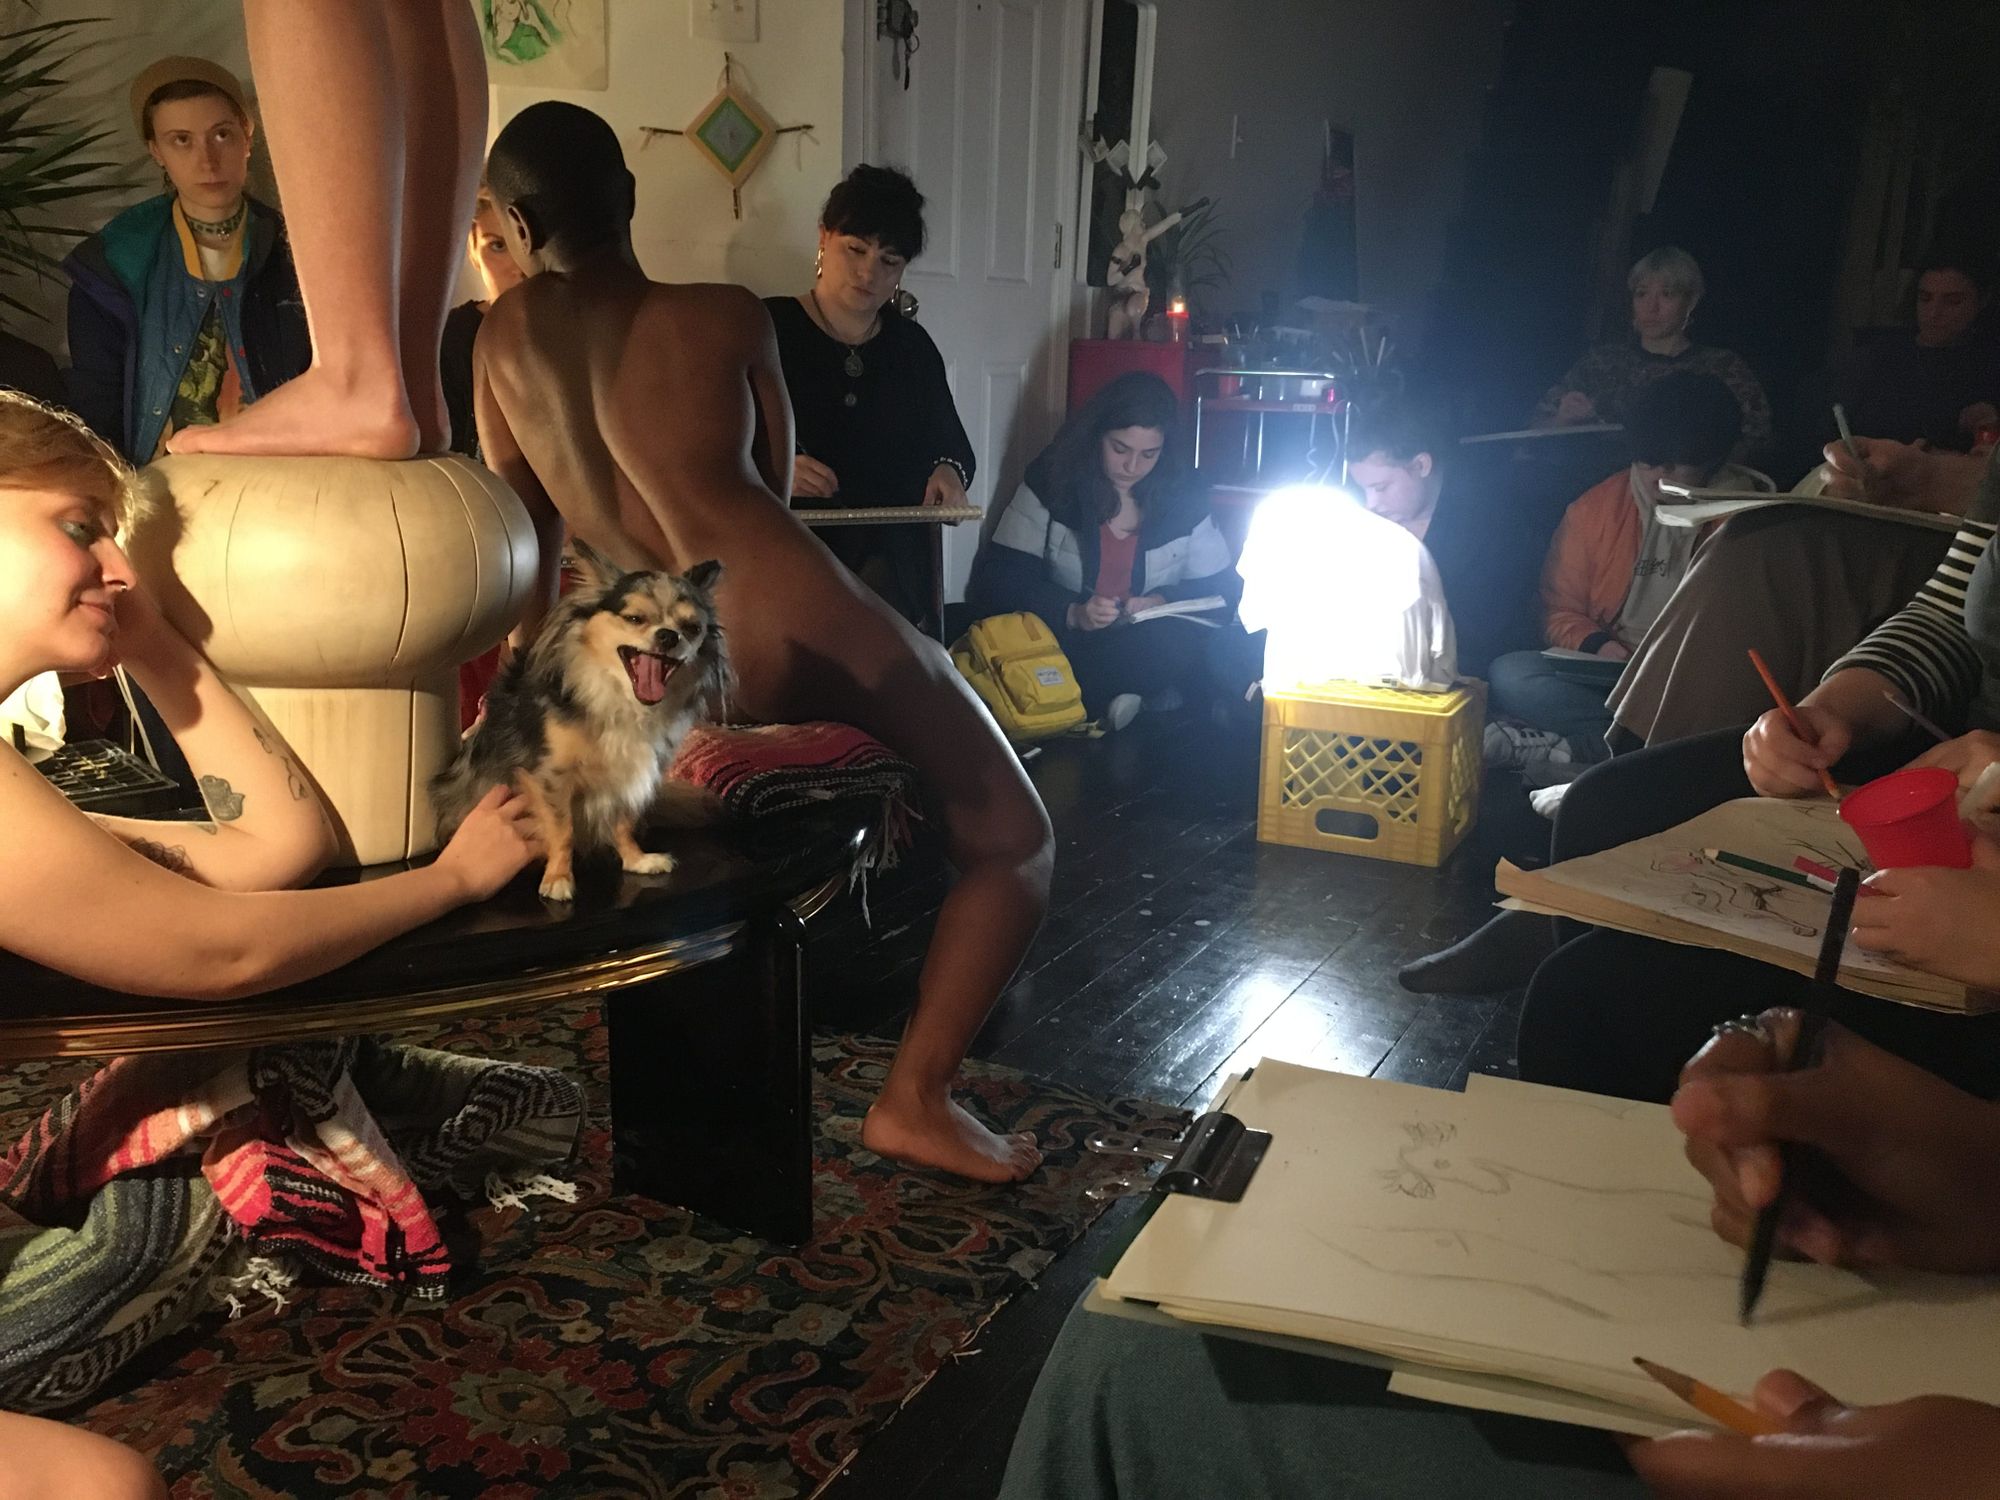 Seeing and Being Seen at a Bushwick Drink and Draw